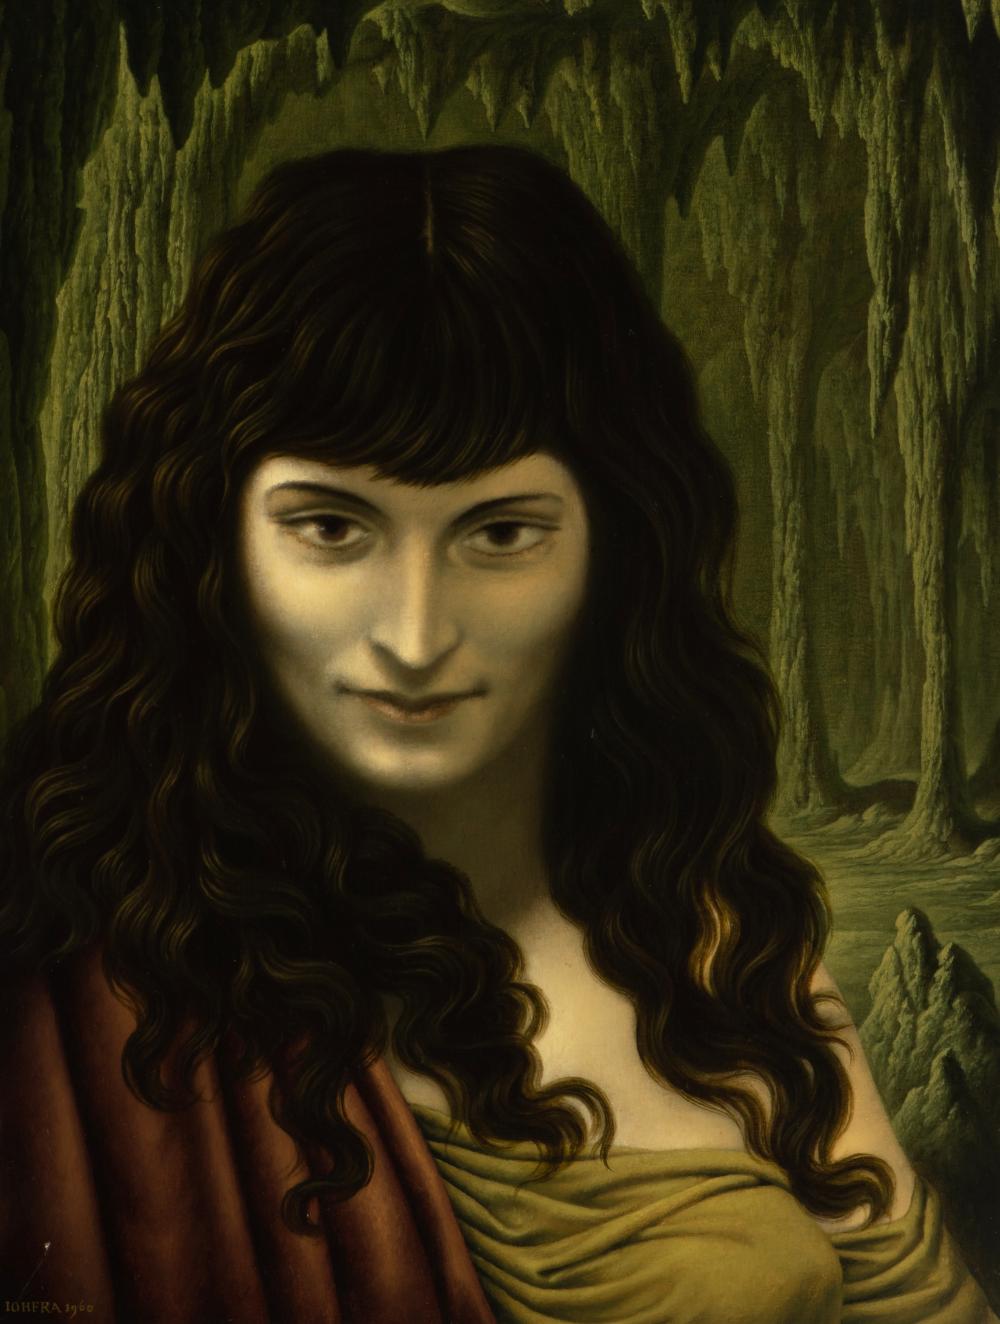 Johfra's Mona Lisa - Mythical lady in a cave (1960)